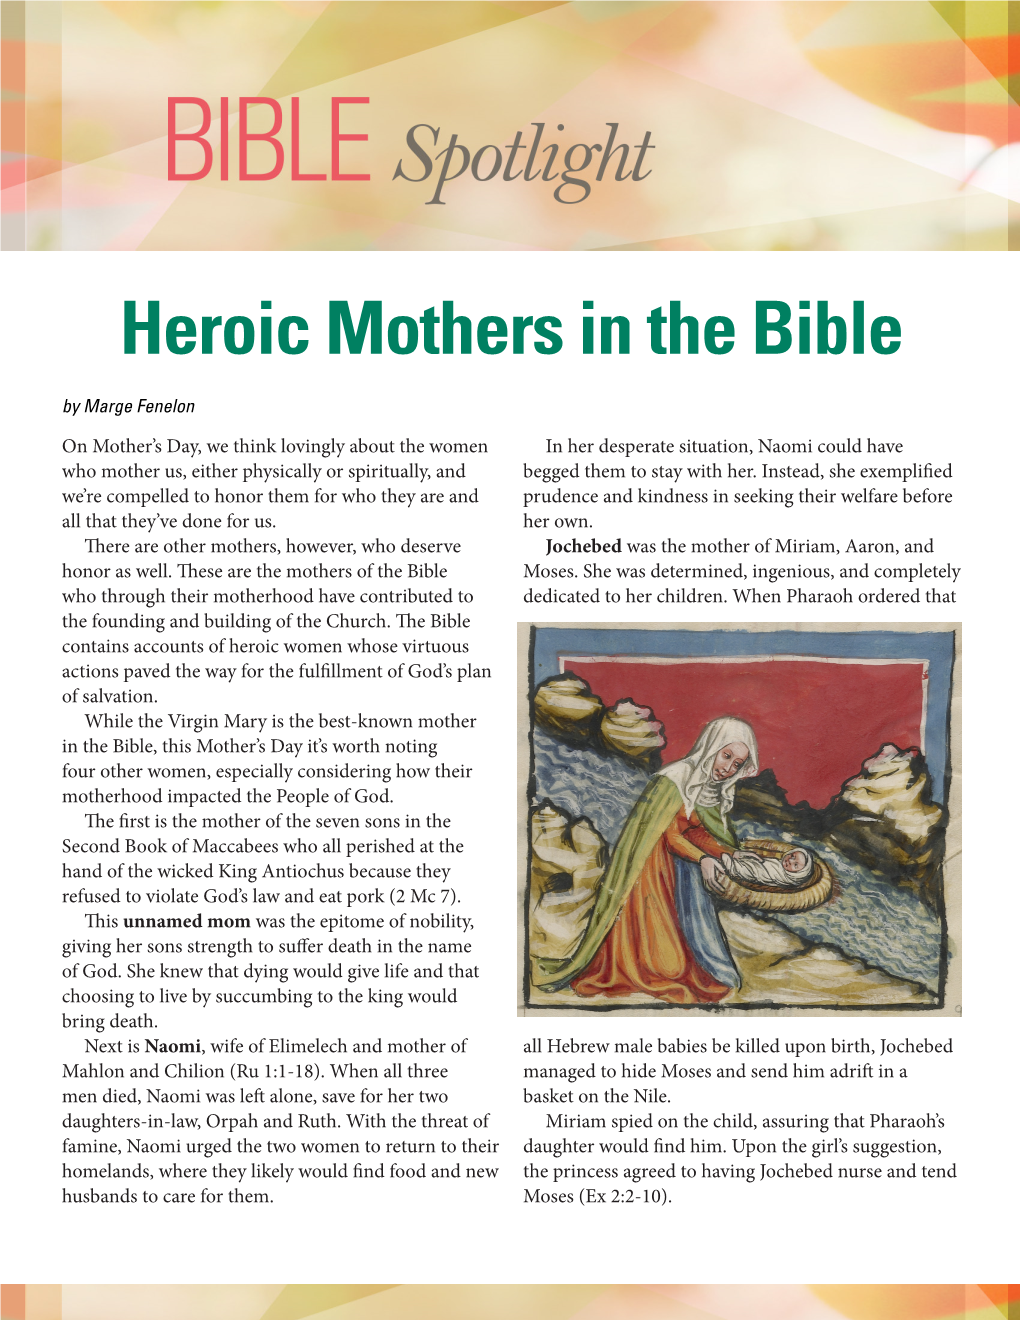 Heroic Mothers in the Bible by Marge Fenelon